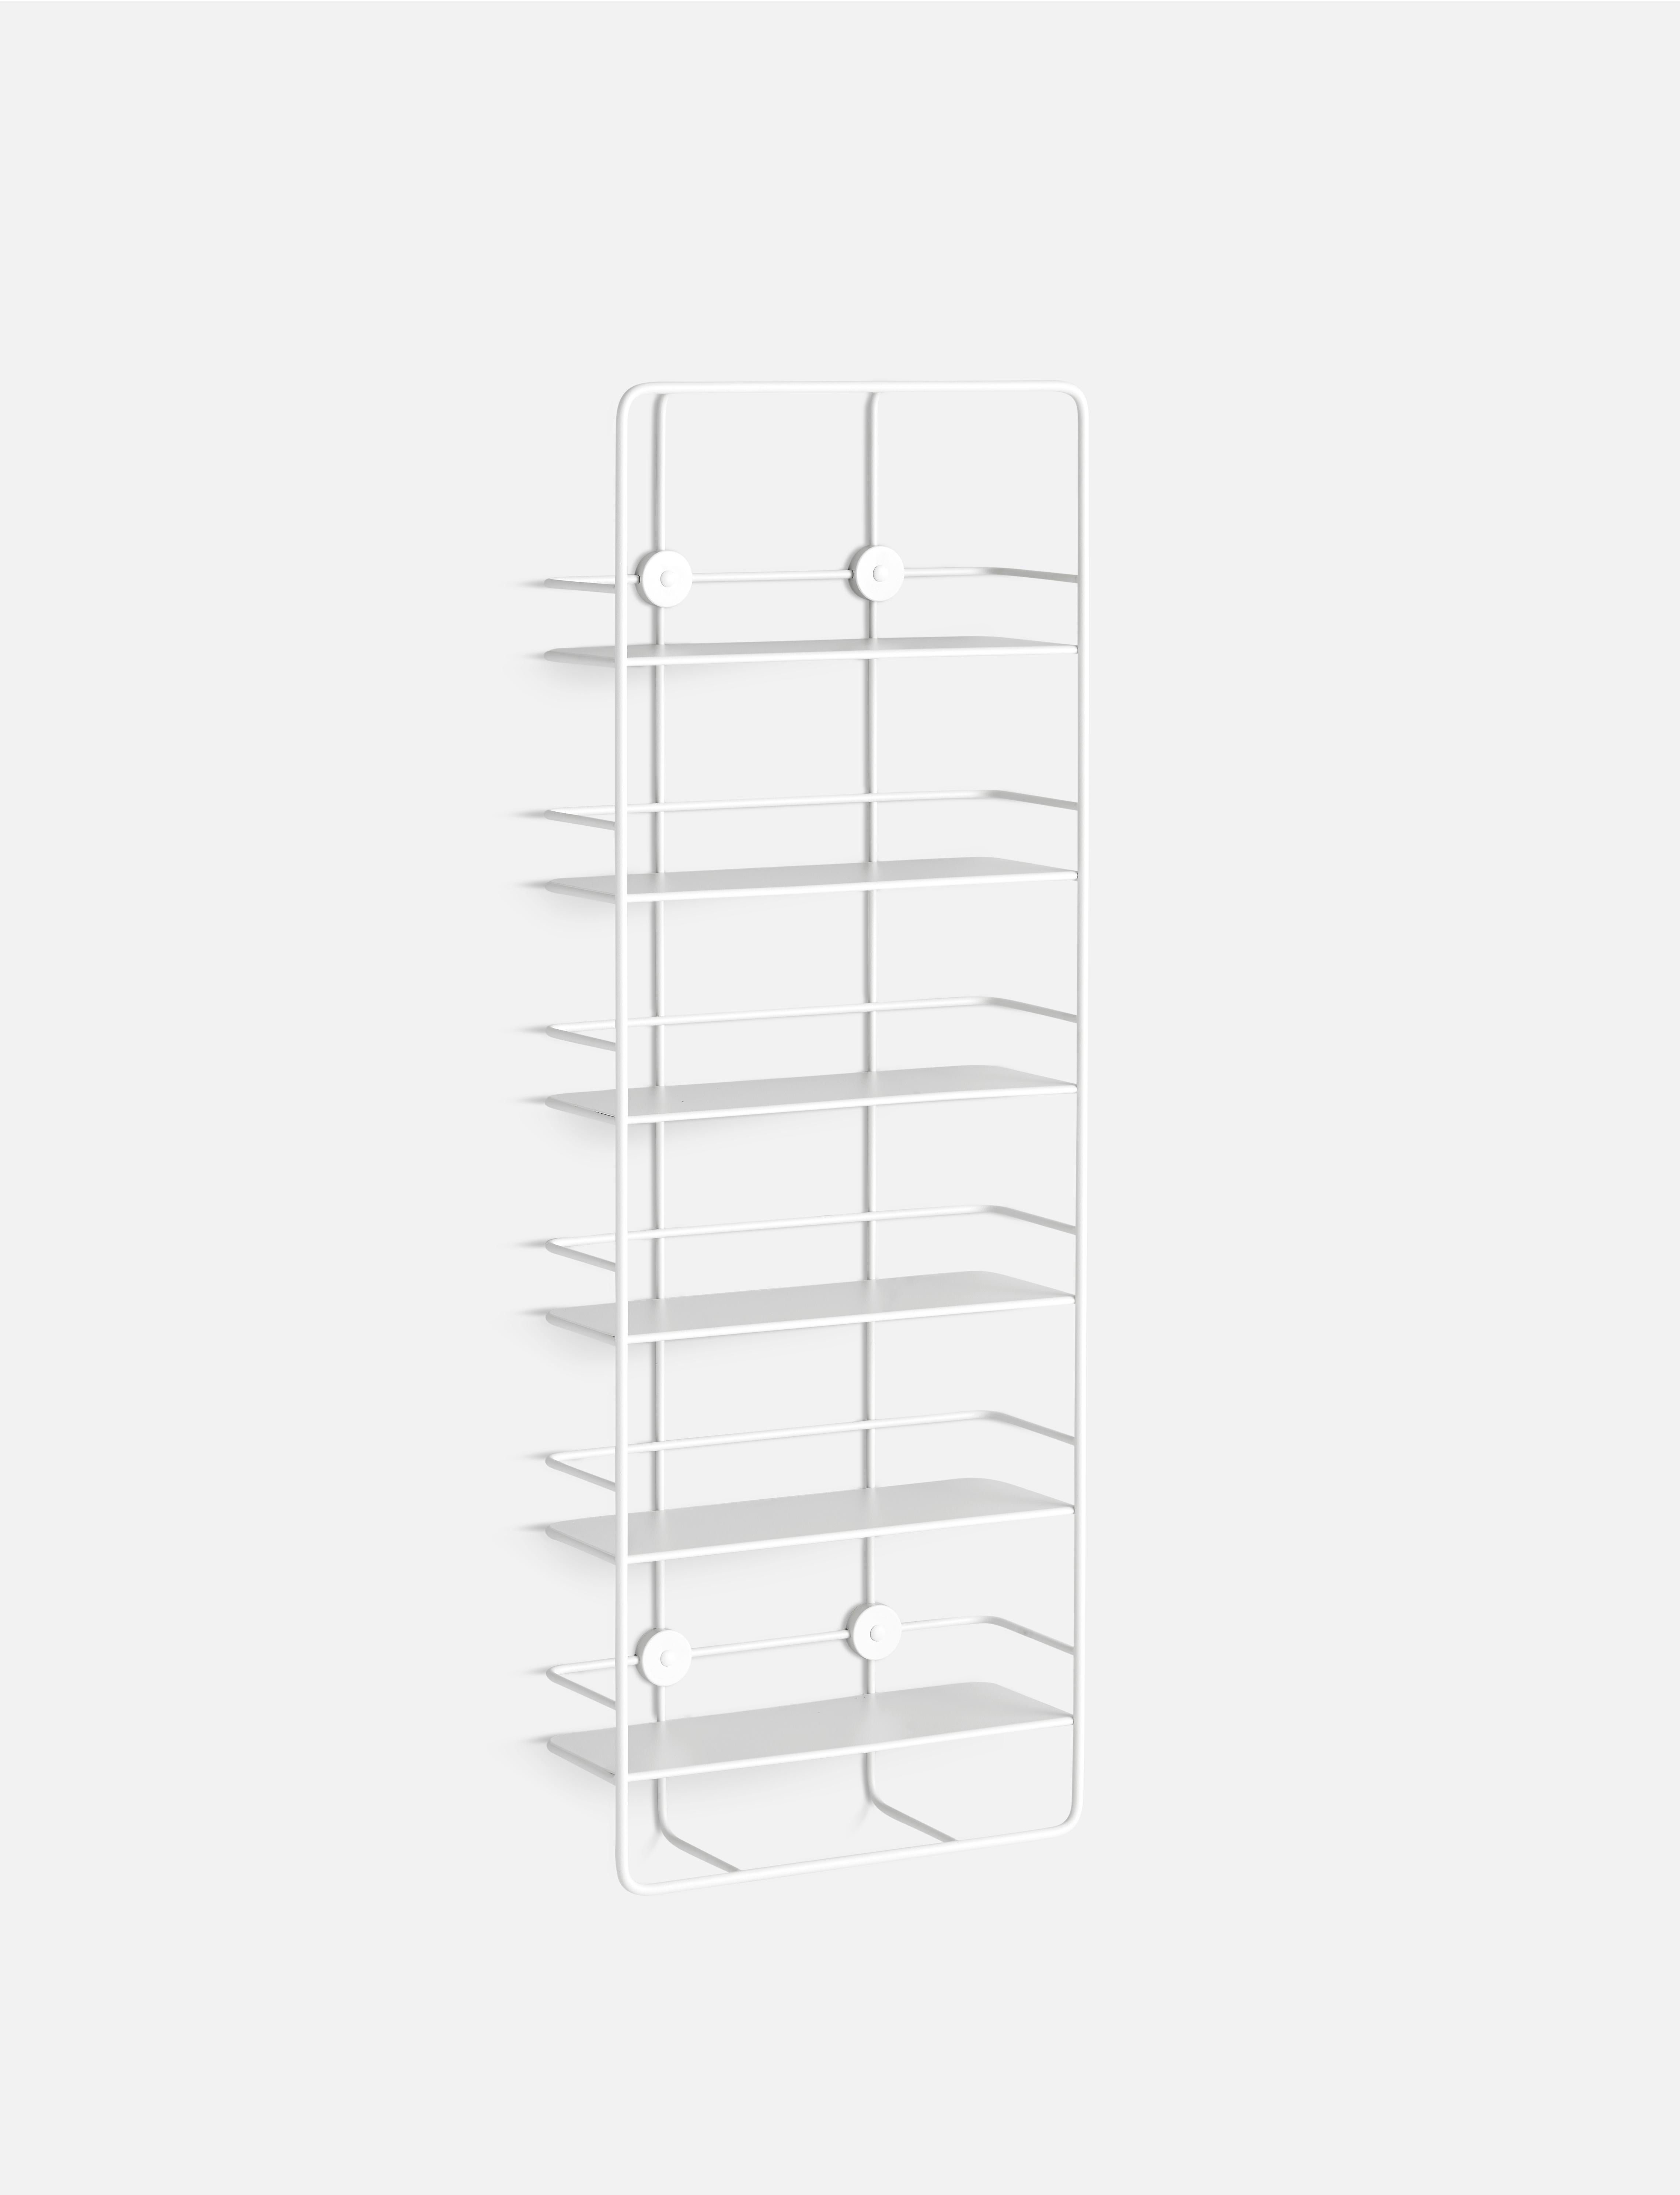 Coupé vertical shelf by Poiat.
Materials: Metal.
Dimensions: D 13.5 x W 37 x H 103 cm.

Poiat is an established architecture and design office based in Helsinki. founded by Antti Rouhunkoski and Timo Mikkonen. The designers met at the University